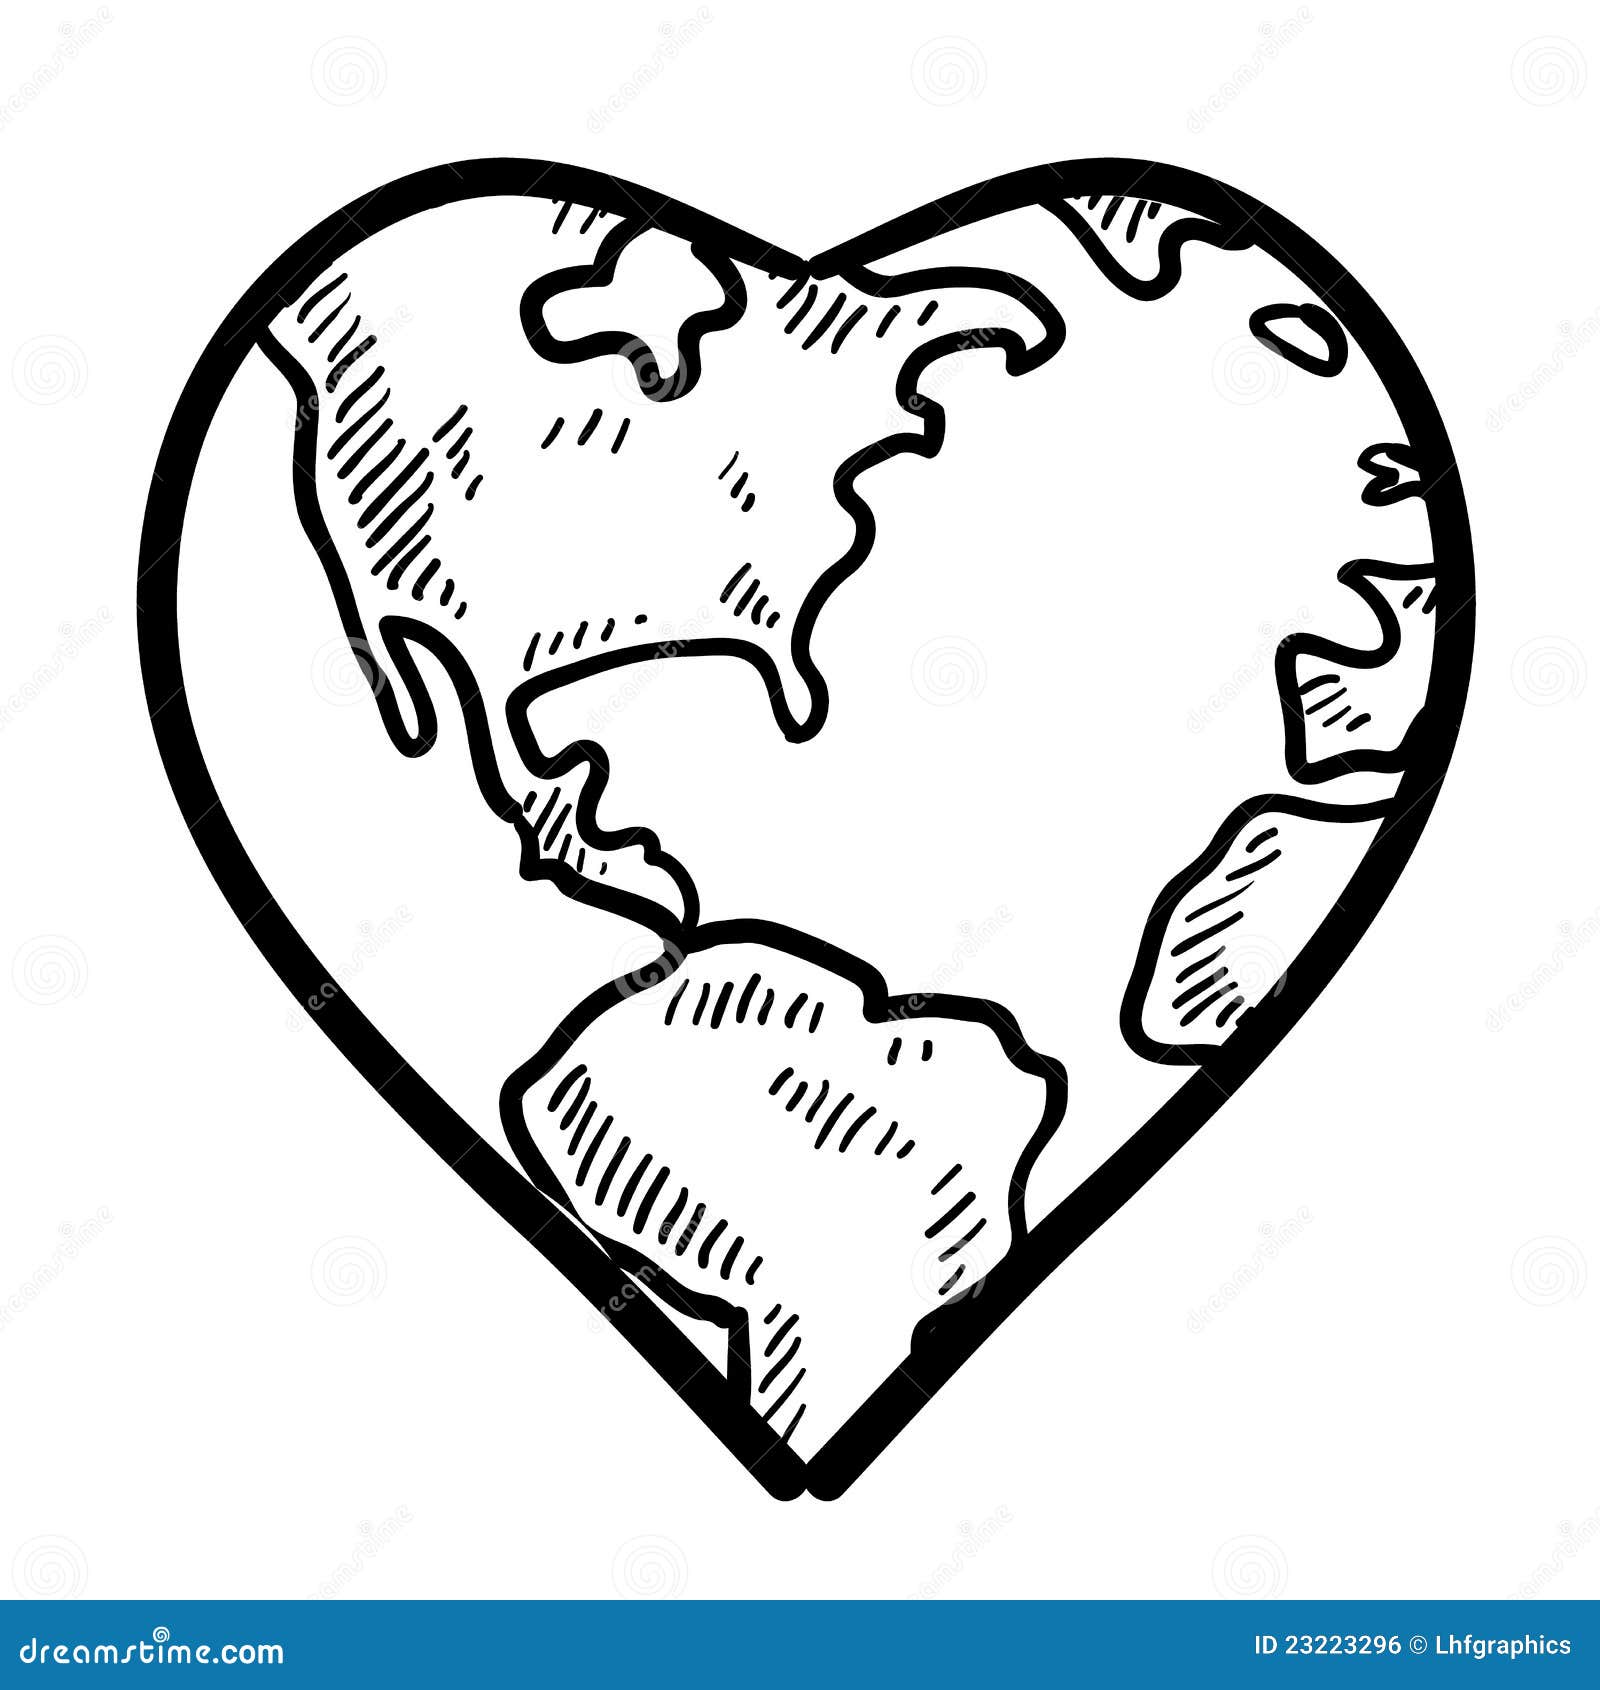 World love sketch stock vector. Illustration of marriage ...